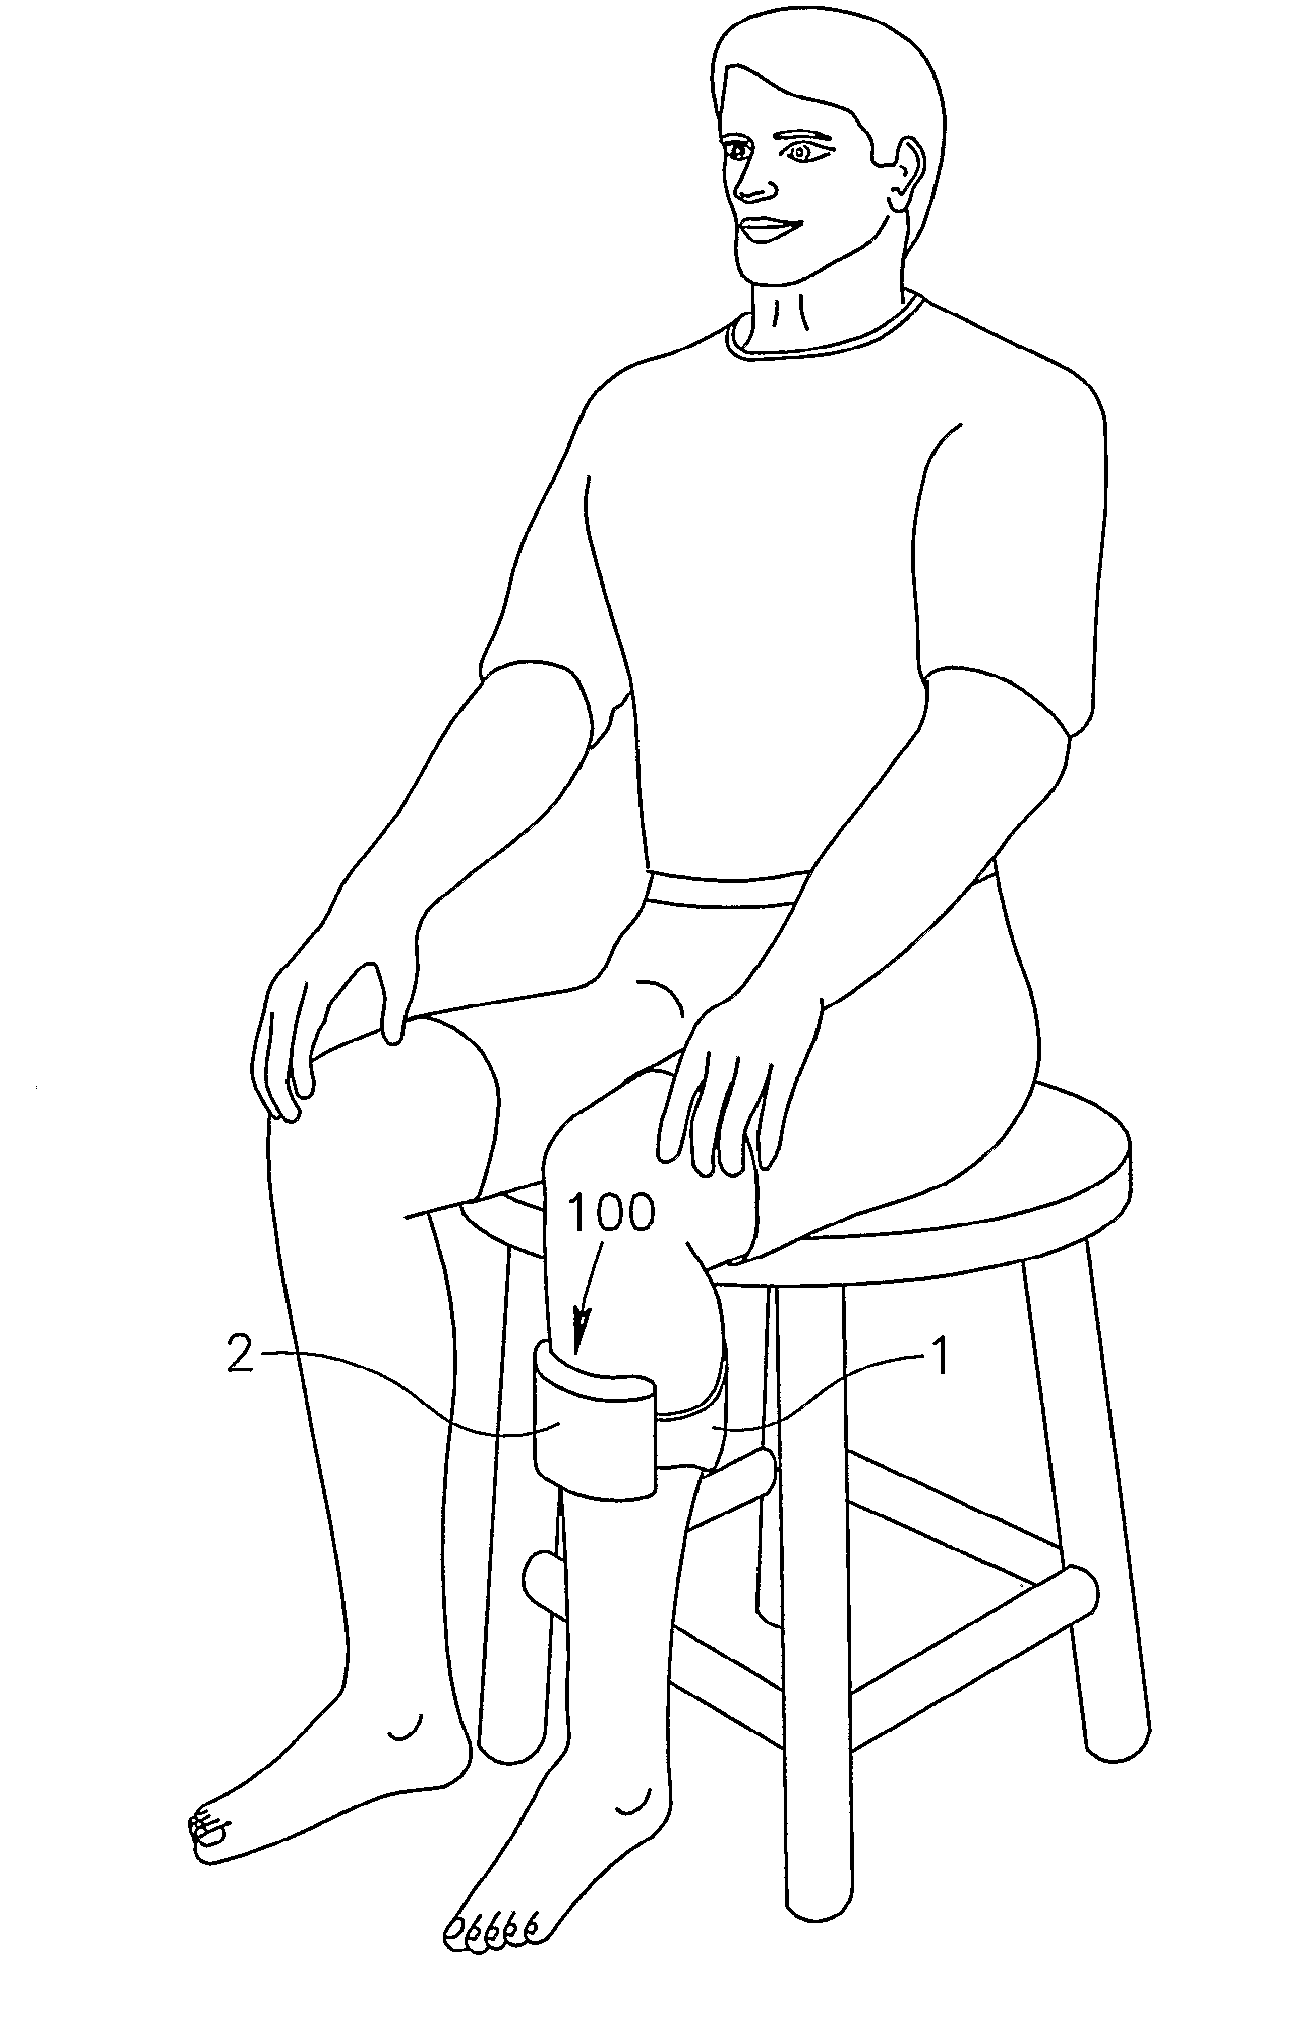 Portable Self-Contained Device for Enhancing Circulation